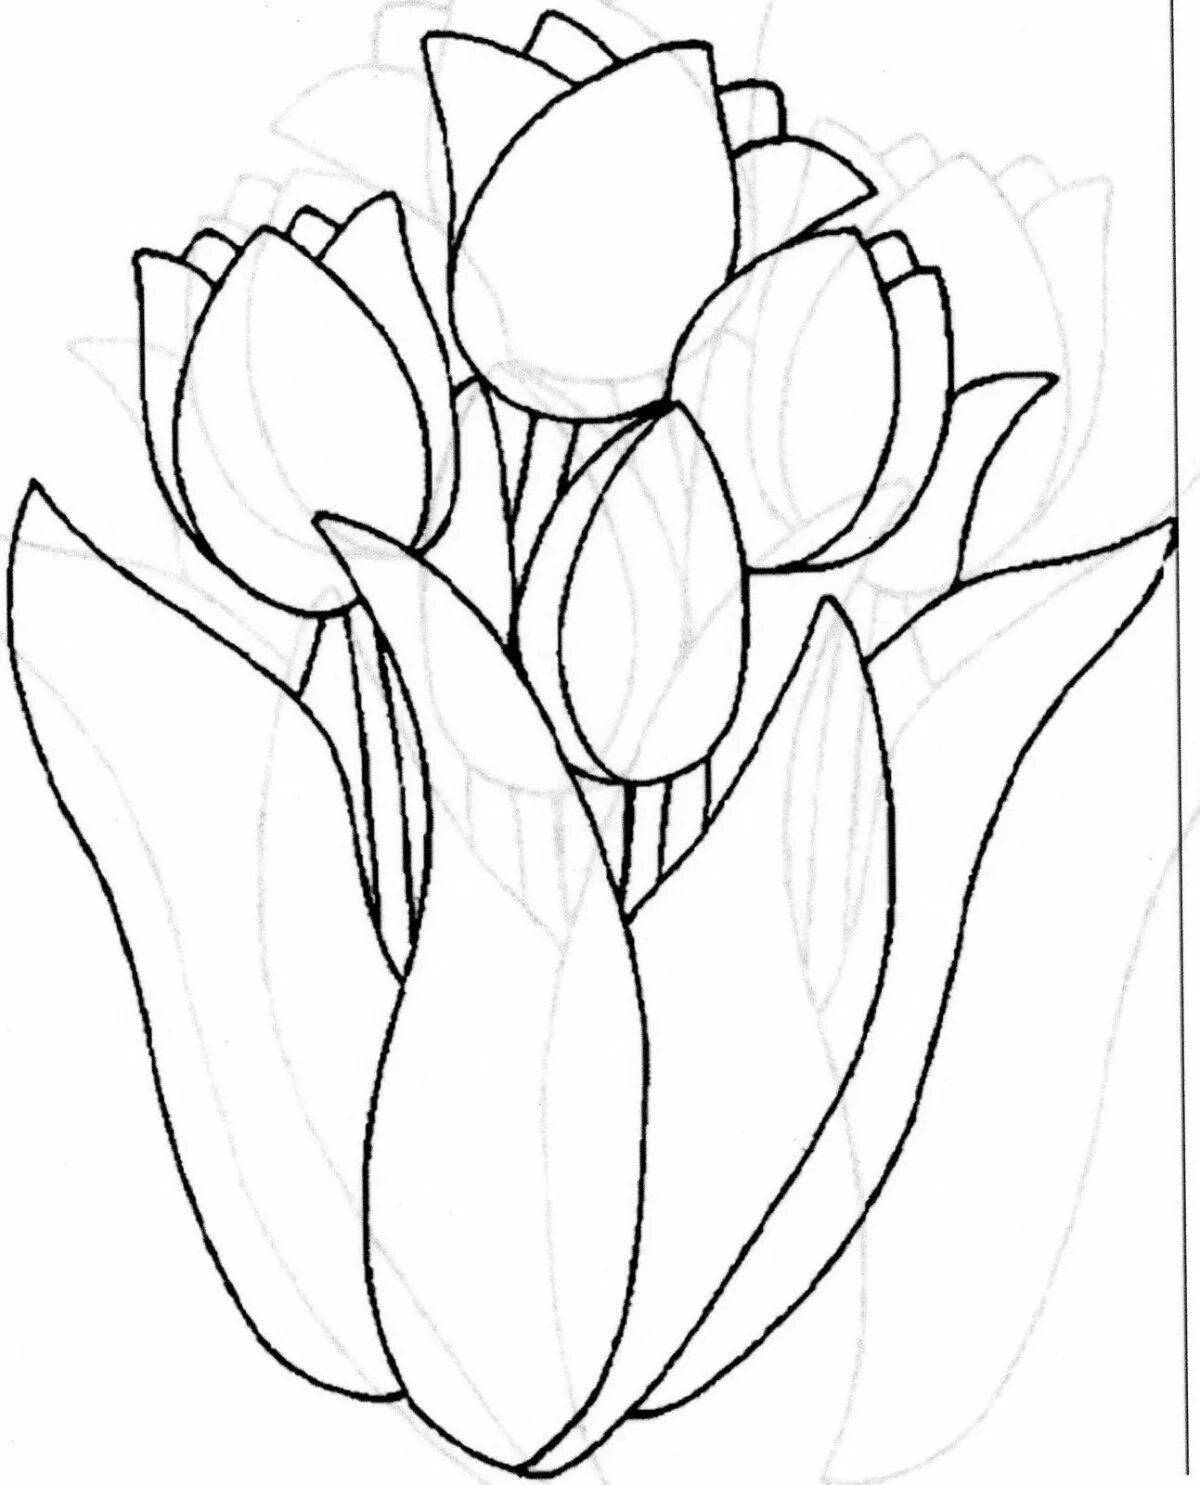 Coloring page wild tulips for March 8